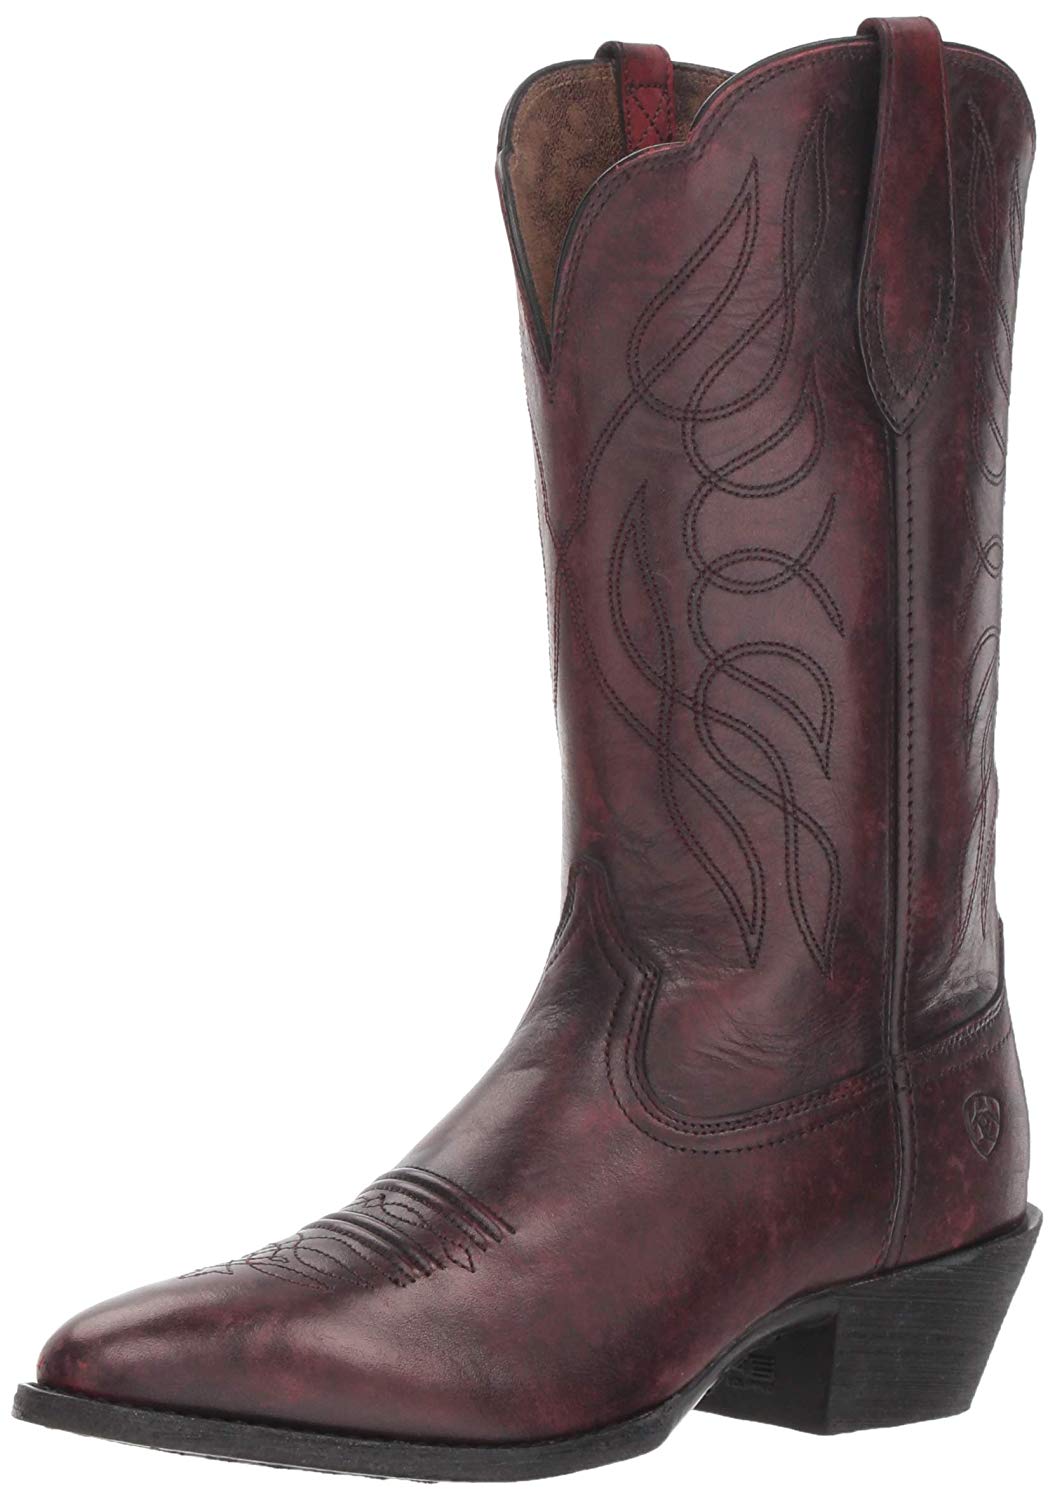 ARIAT Men's Heritage Western R Toe Boot, Ombre Red, Size 8.5 cvIg | eBay